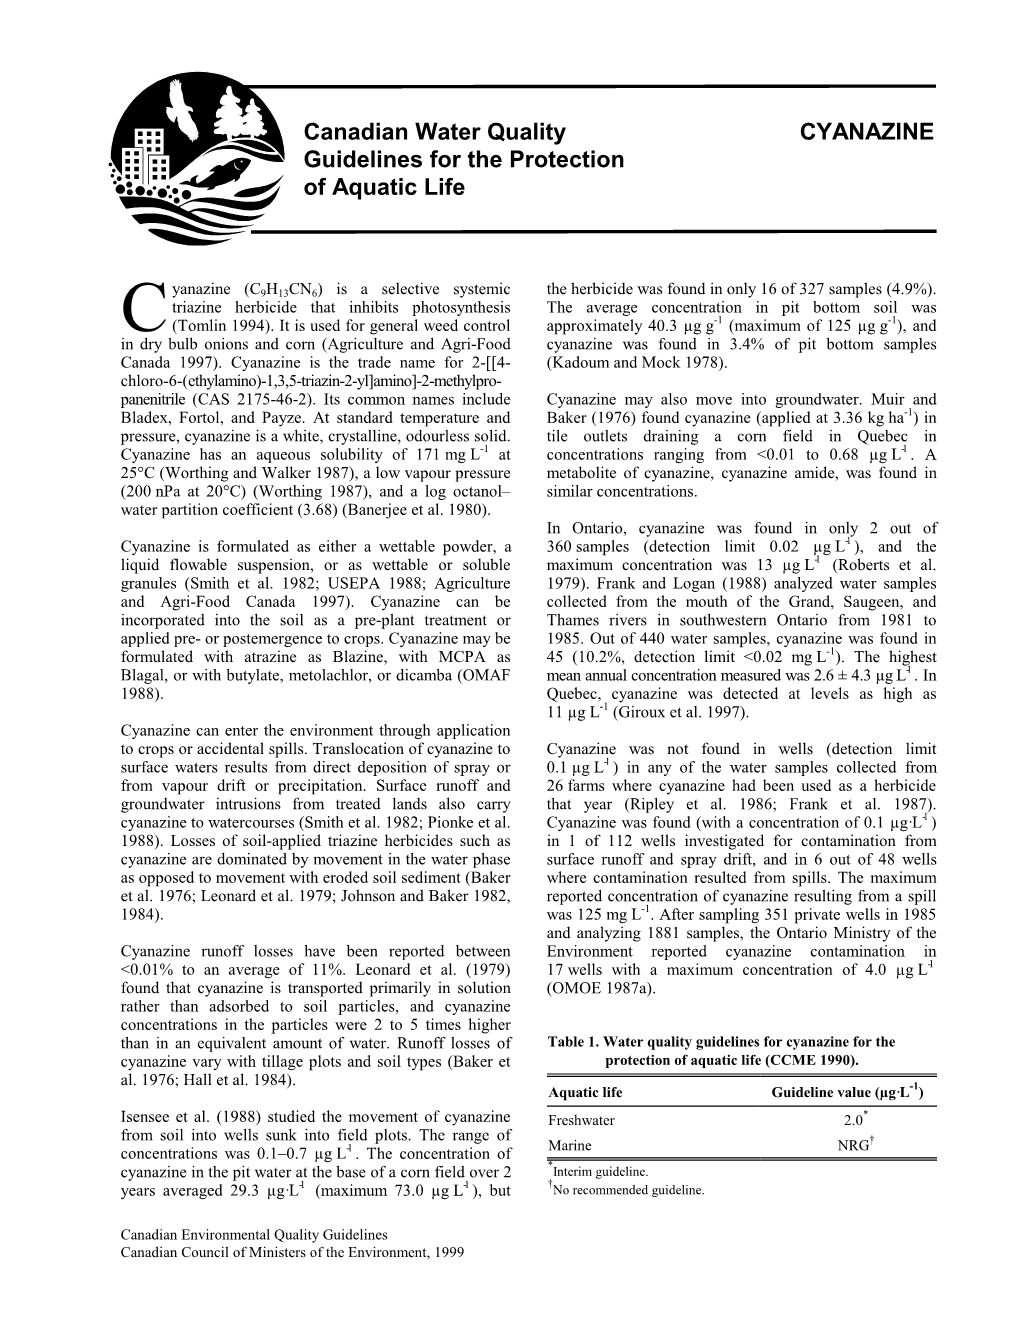 Canadian Water Quality Guidelines for the Protection of Aquatic Life